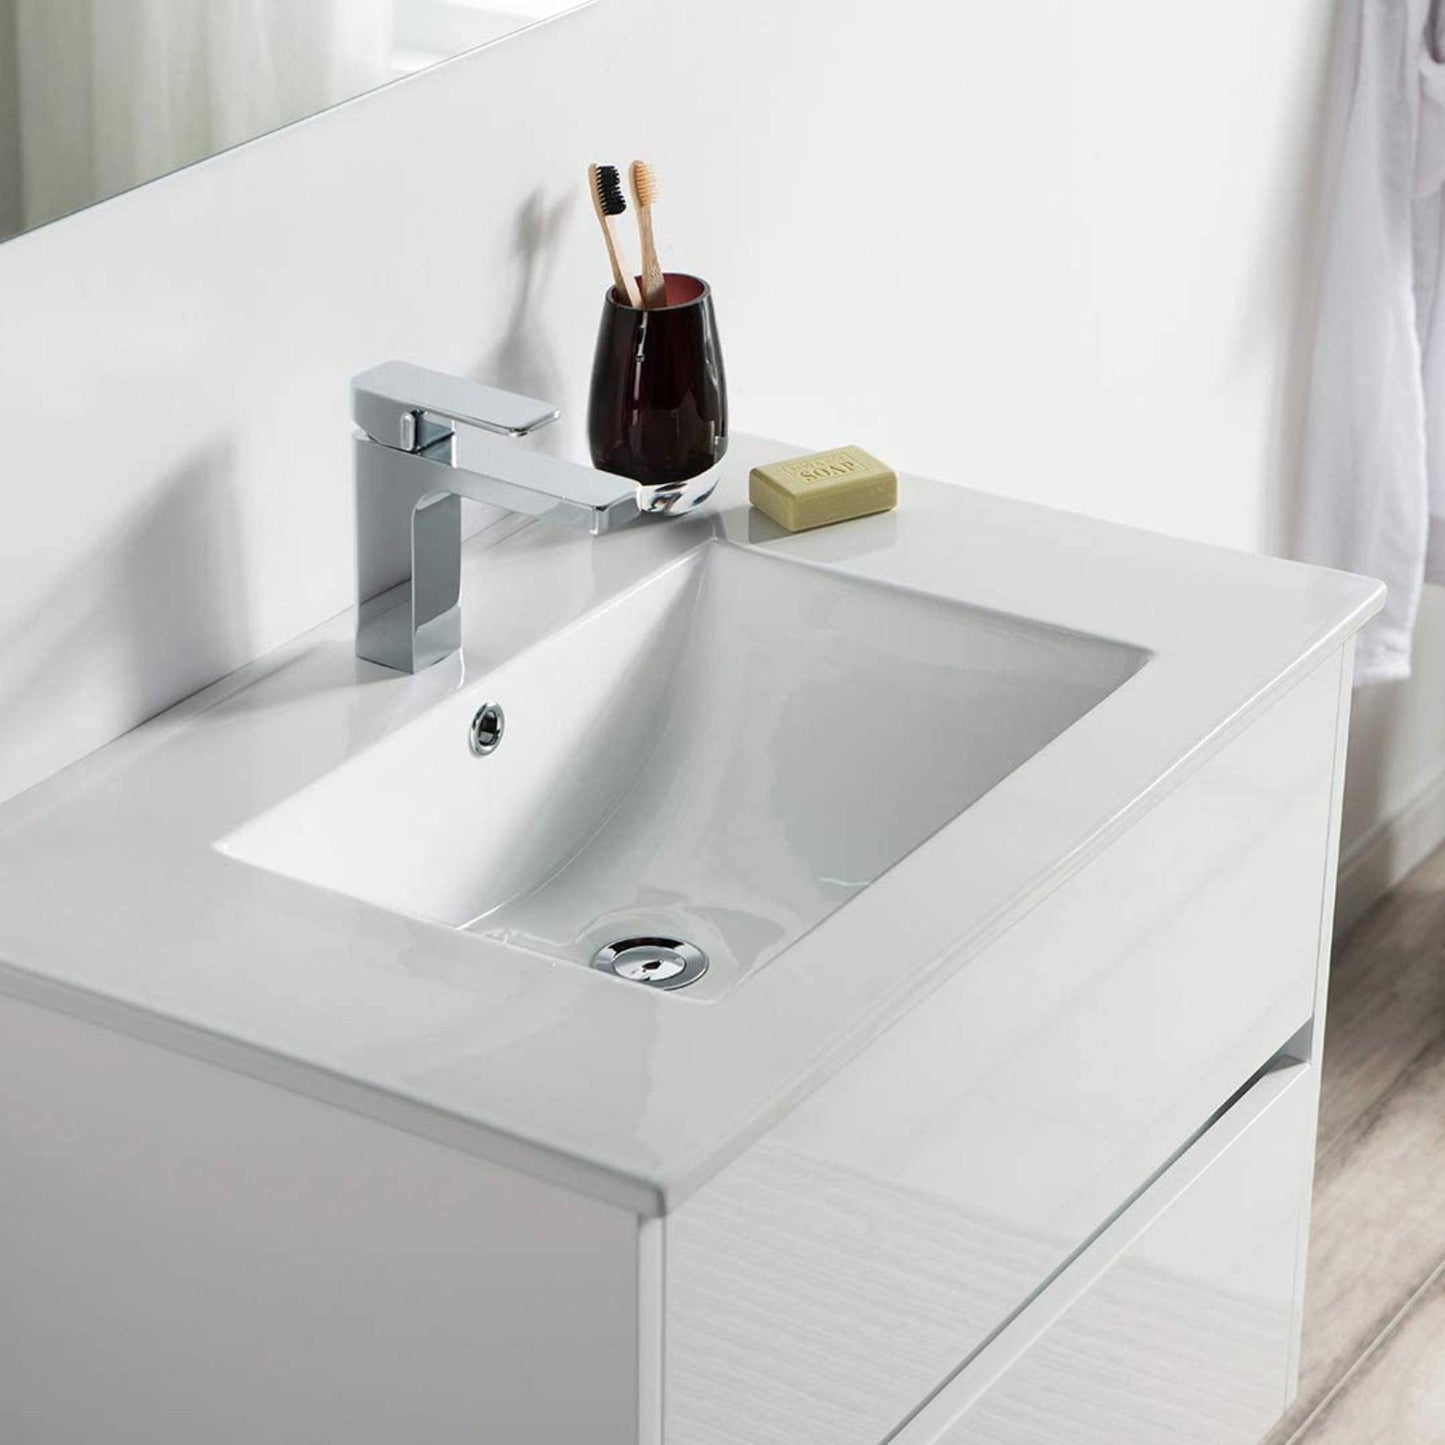 Blossom Valencia 30" 2-Drawer White Wall-Mounted Vanity Set With Ceramic Top, Integrated Single Sink and Mirror